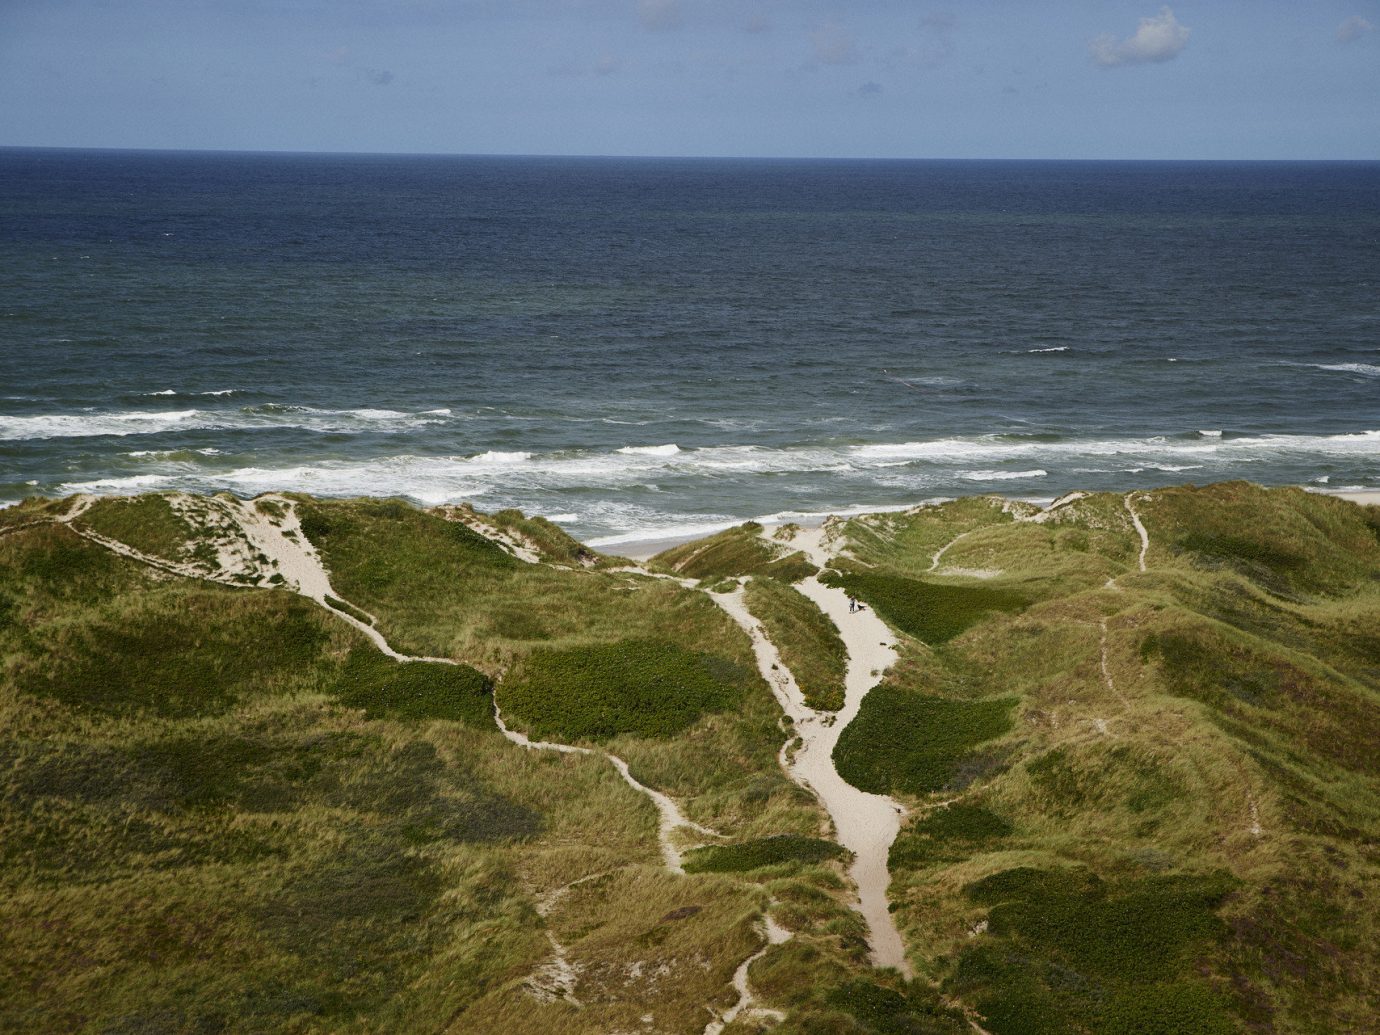 Beach dunes grass Ocean ocean view path sand Travel Tips outdoor water Coast shore Sea body of water Nature cliff horizon wind wave wave terrain cape rock bay wind cove aerial photography